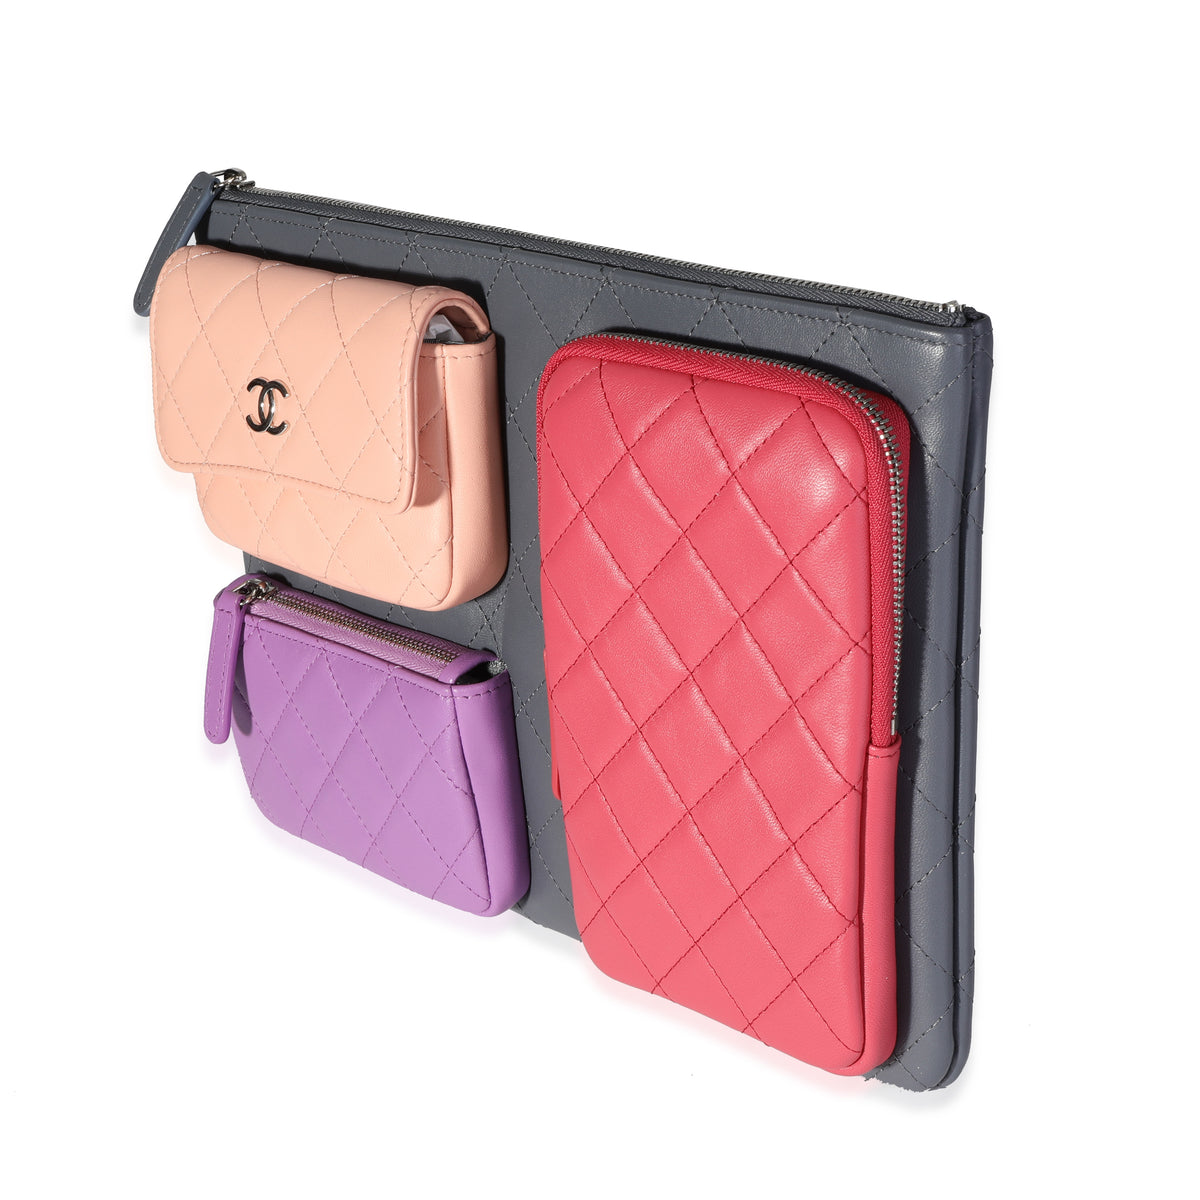 Chanel Multicolor Quilted Lambskin Multi-Pocket Zip Case